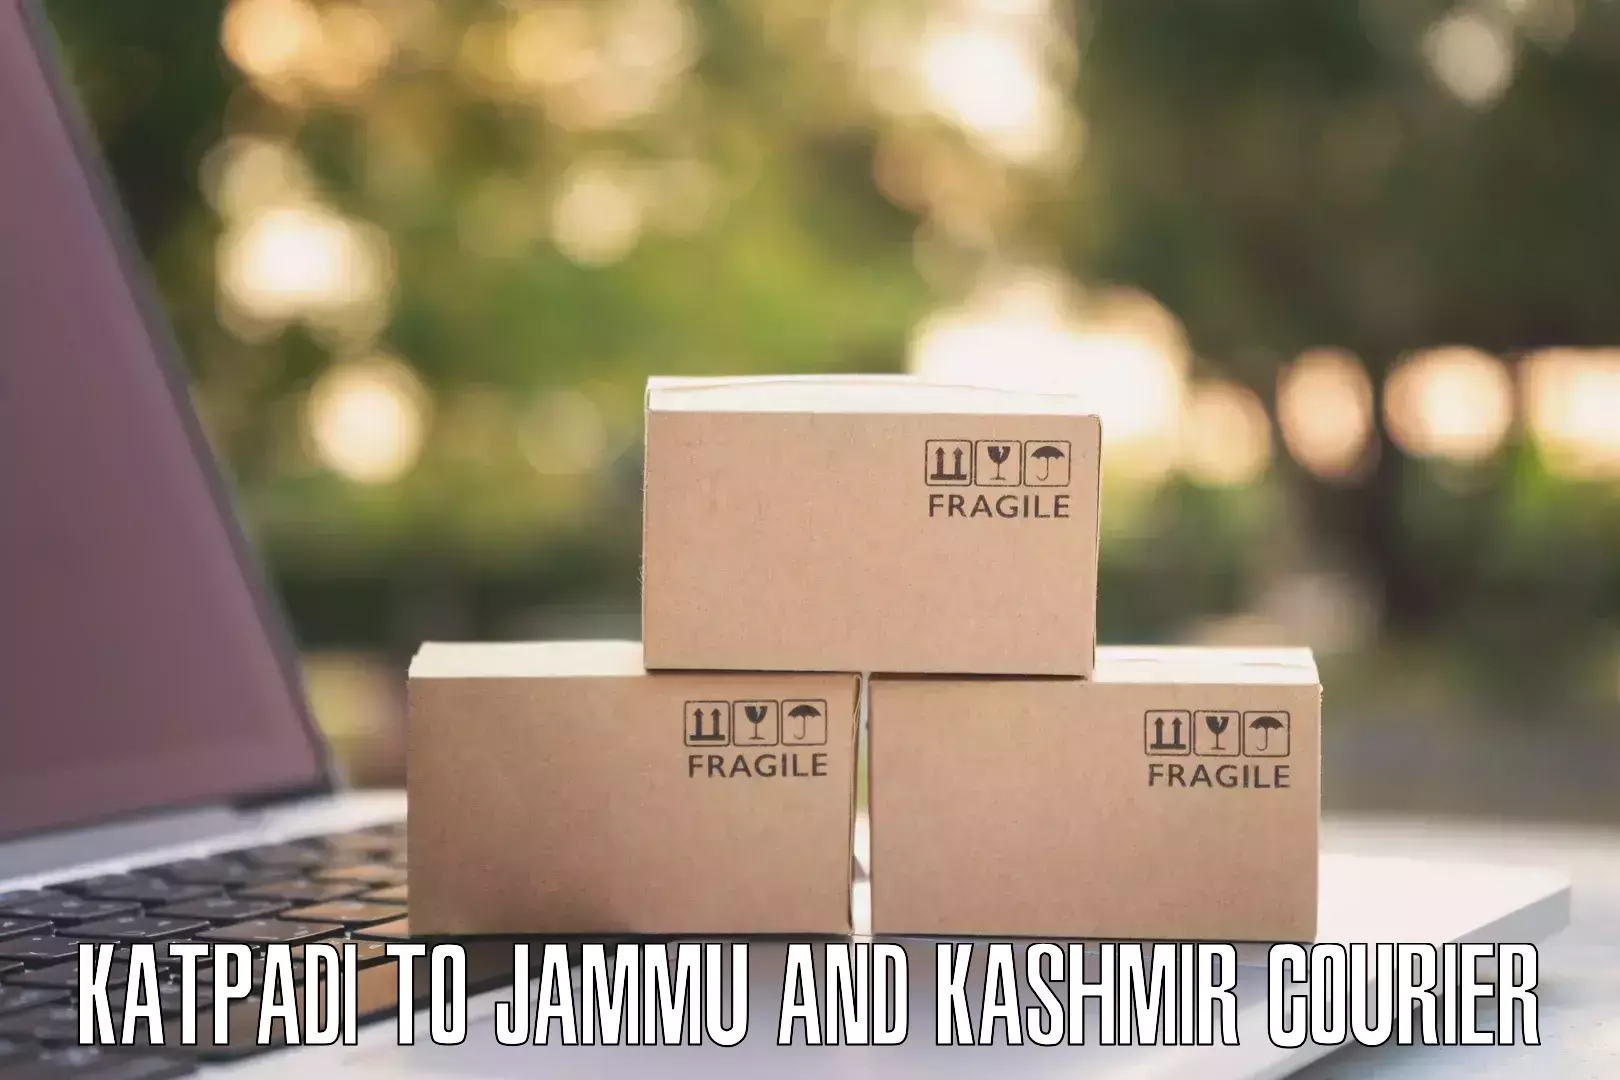 Residential courier service Katpadi to Udhampur